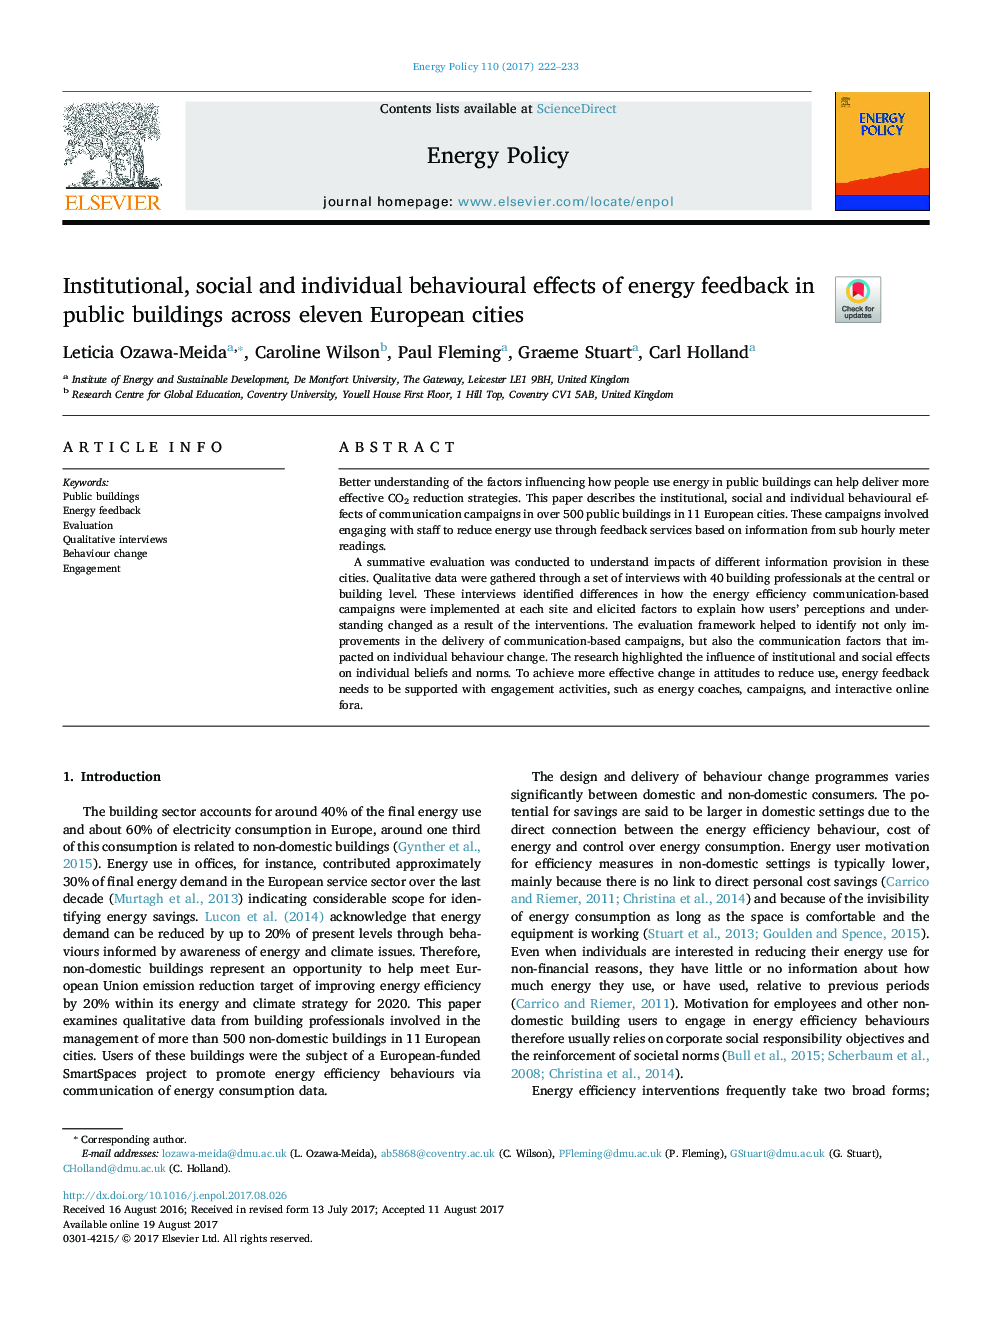 Institutional, social and individual behavioural effects of energy feedback in public buildings across eleven European cities